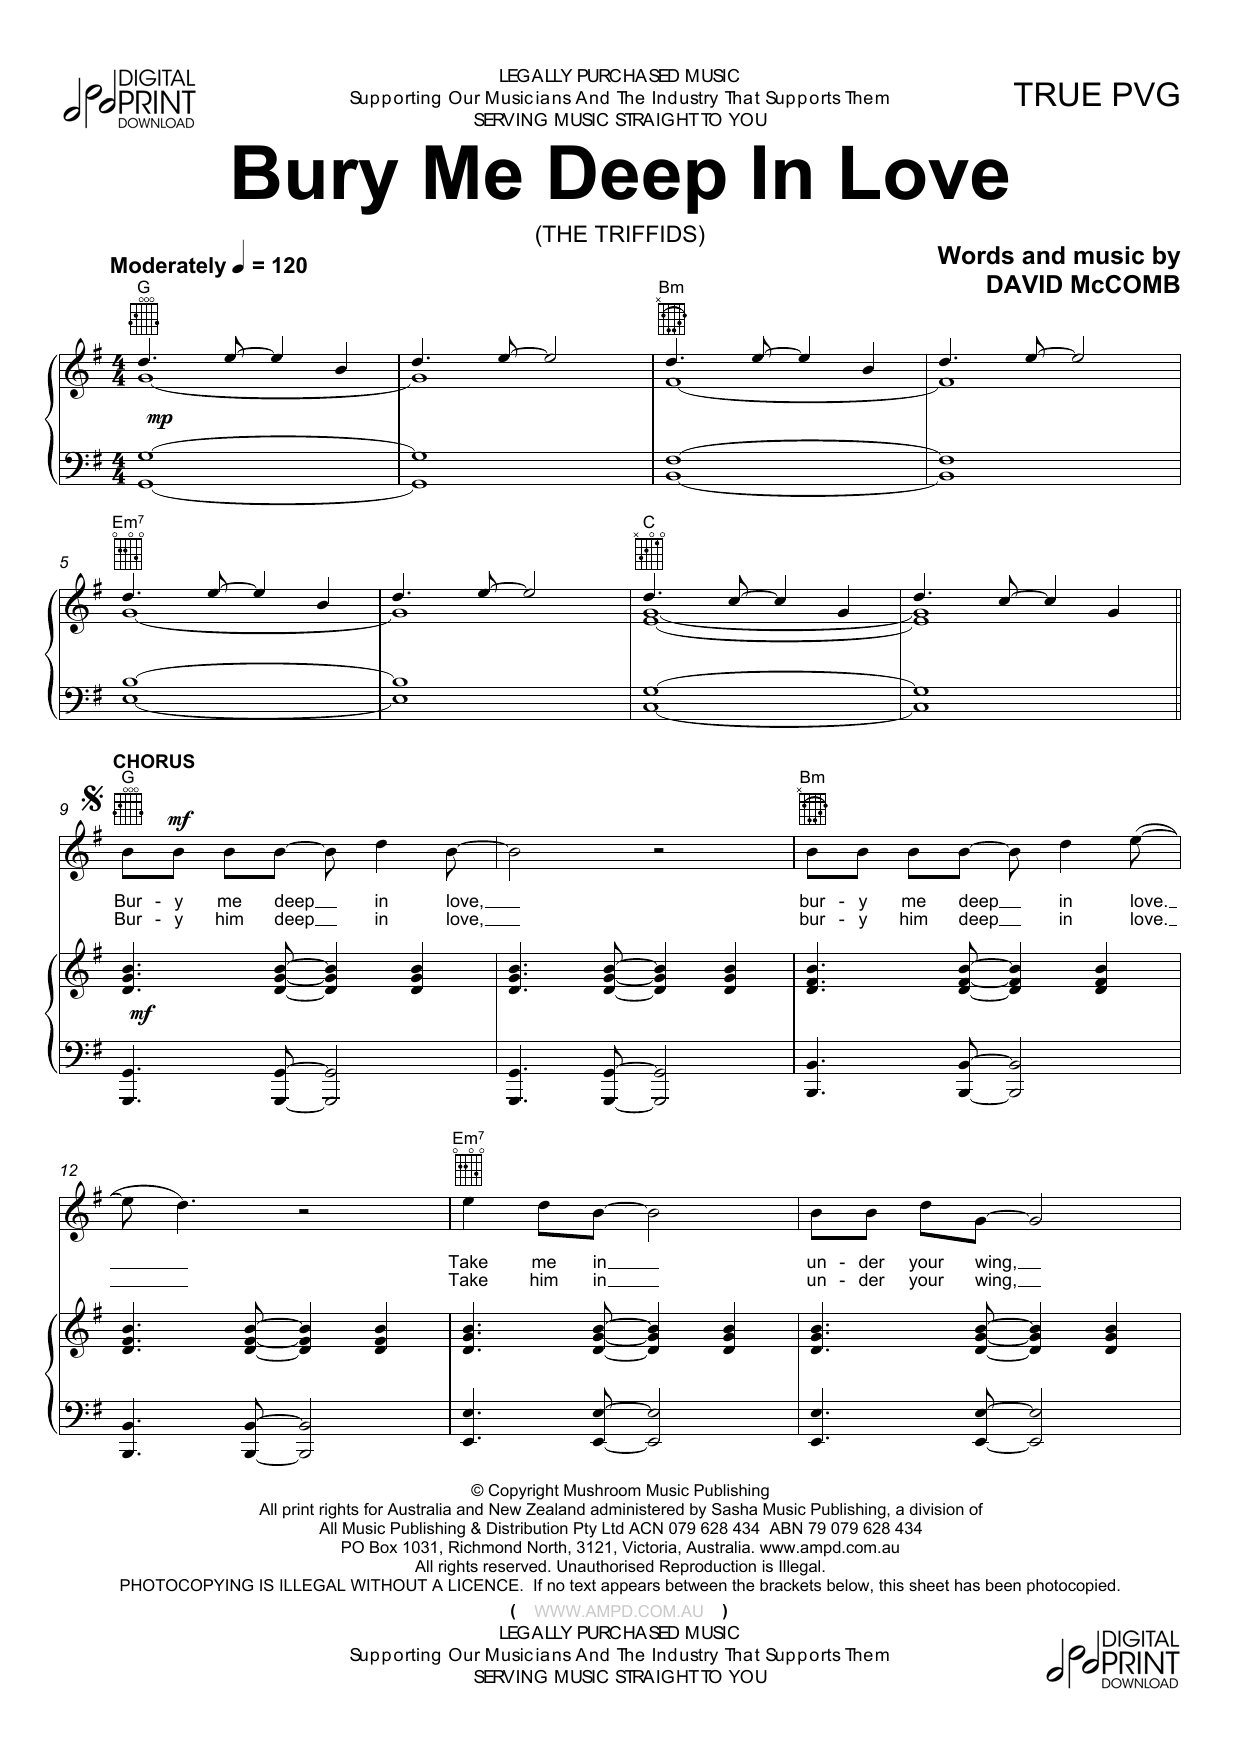 Download The Triffids Bury Me Deep In Love Sheet Music